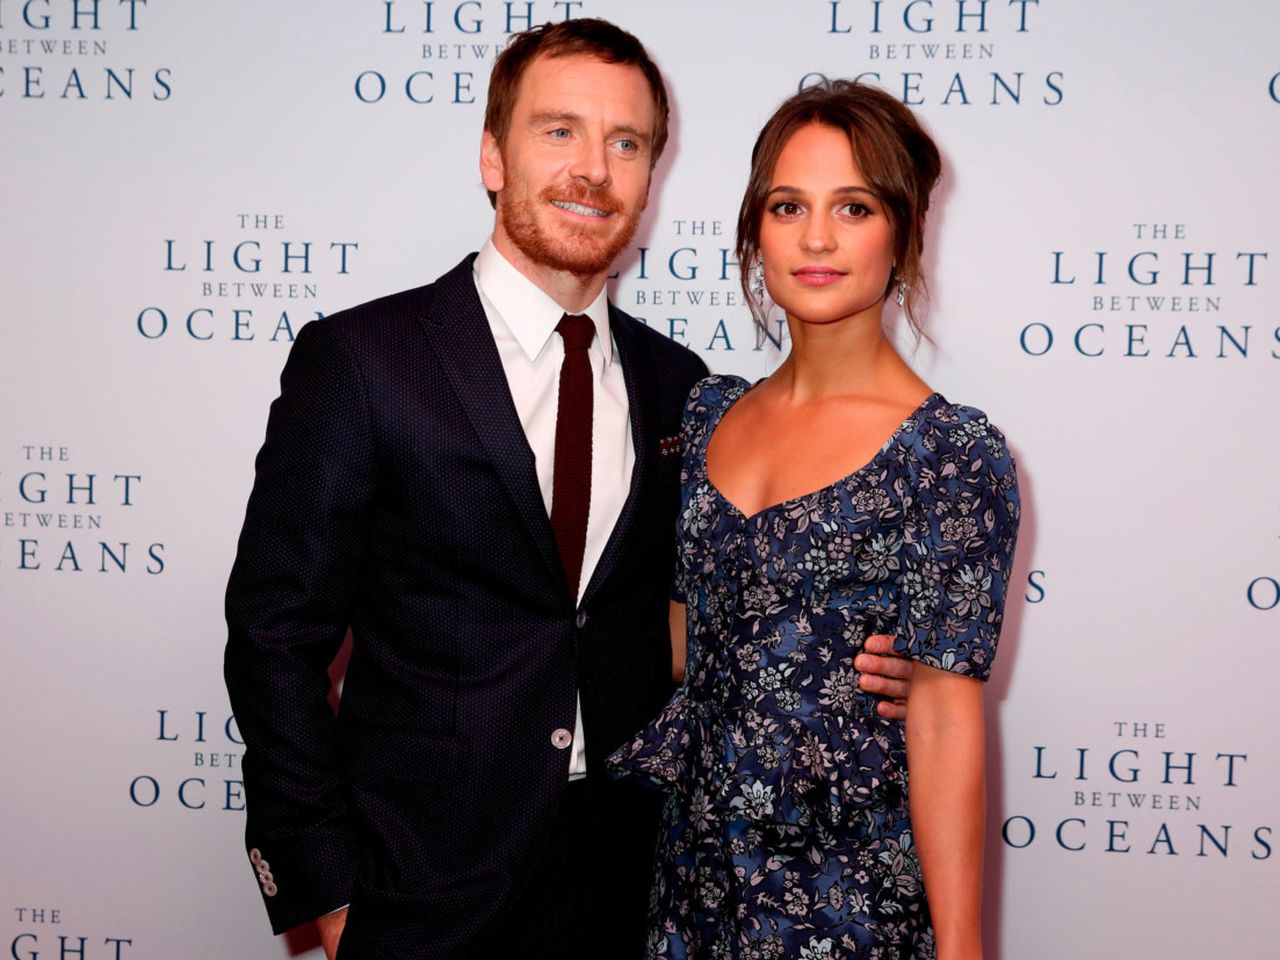 Michael Fassbender spotted with a baby while in Paris with Alicia